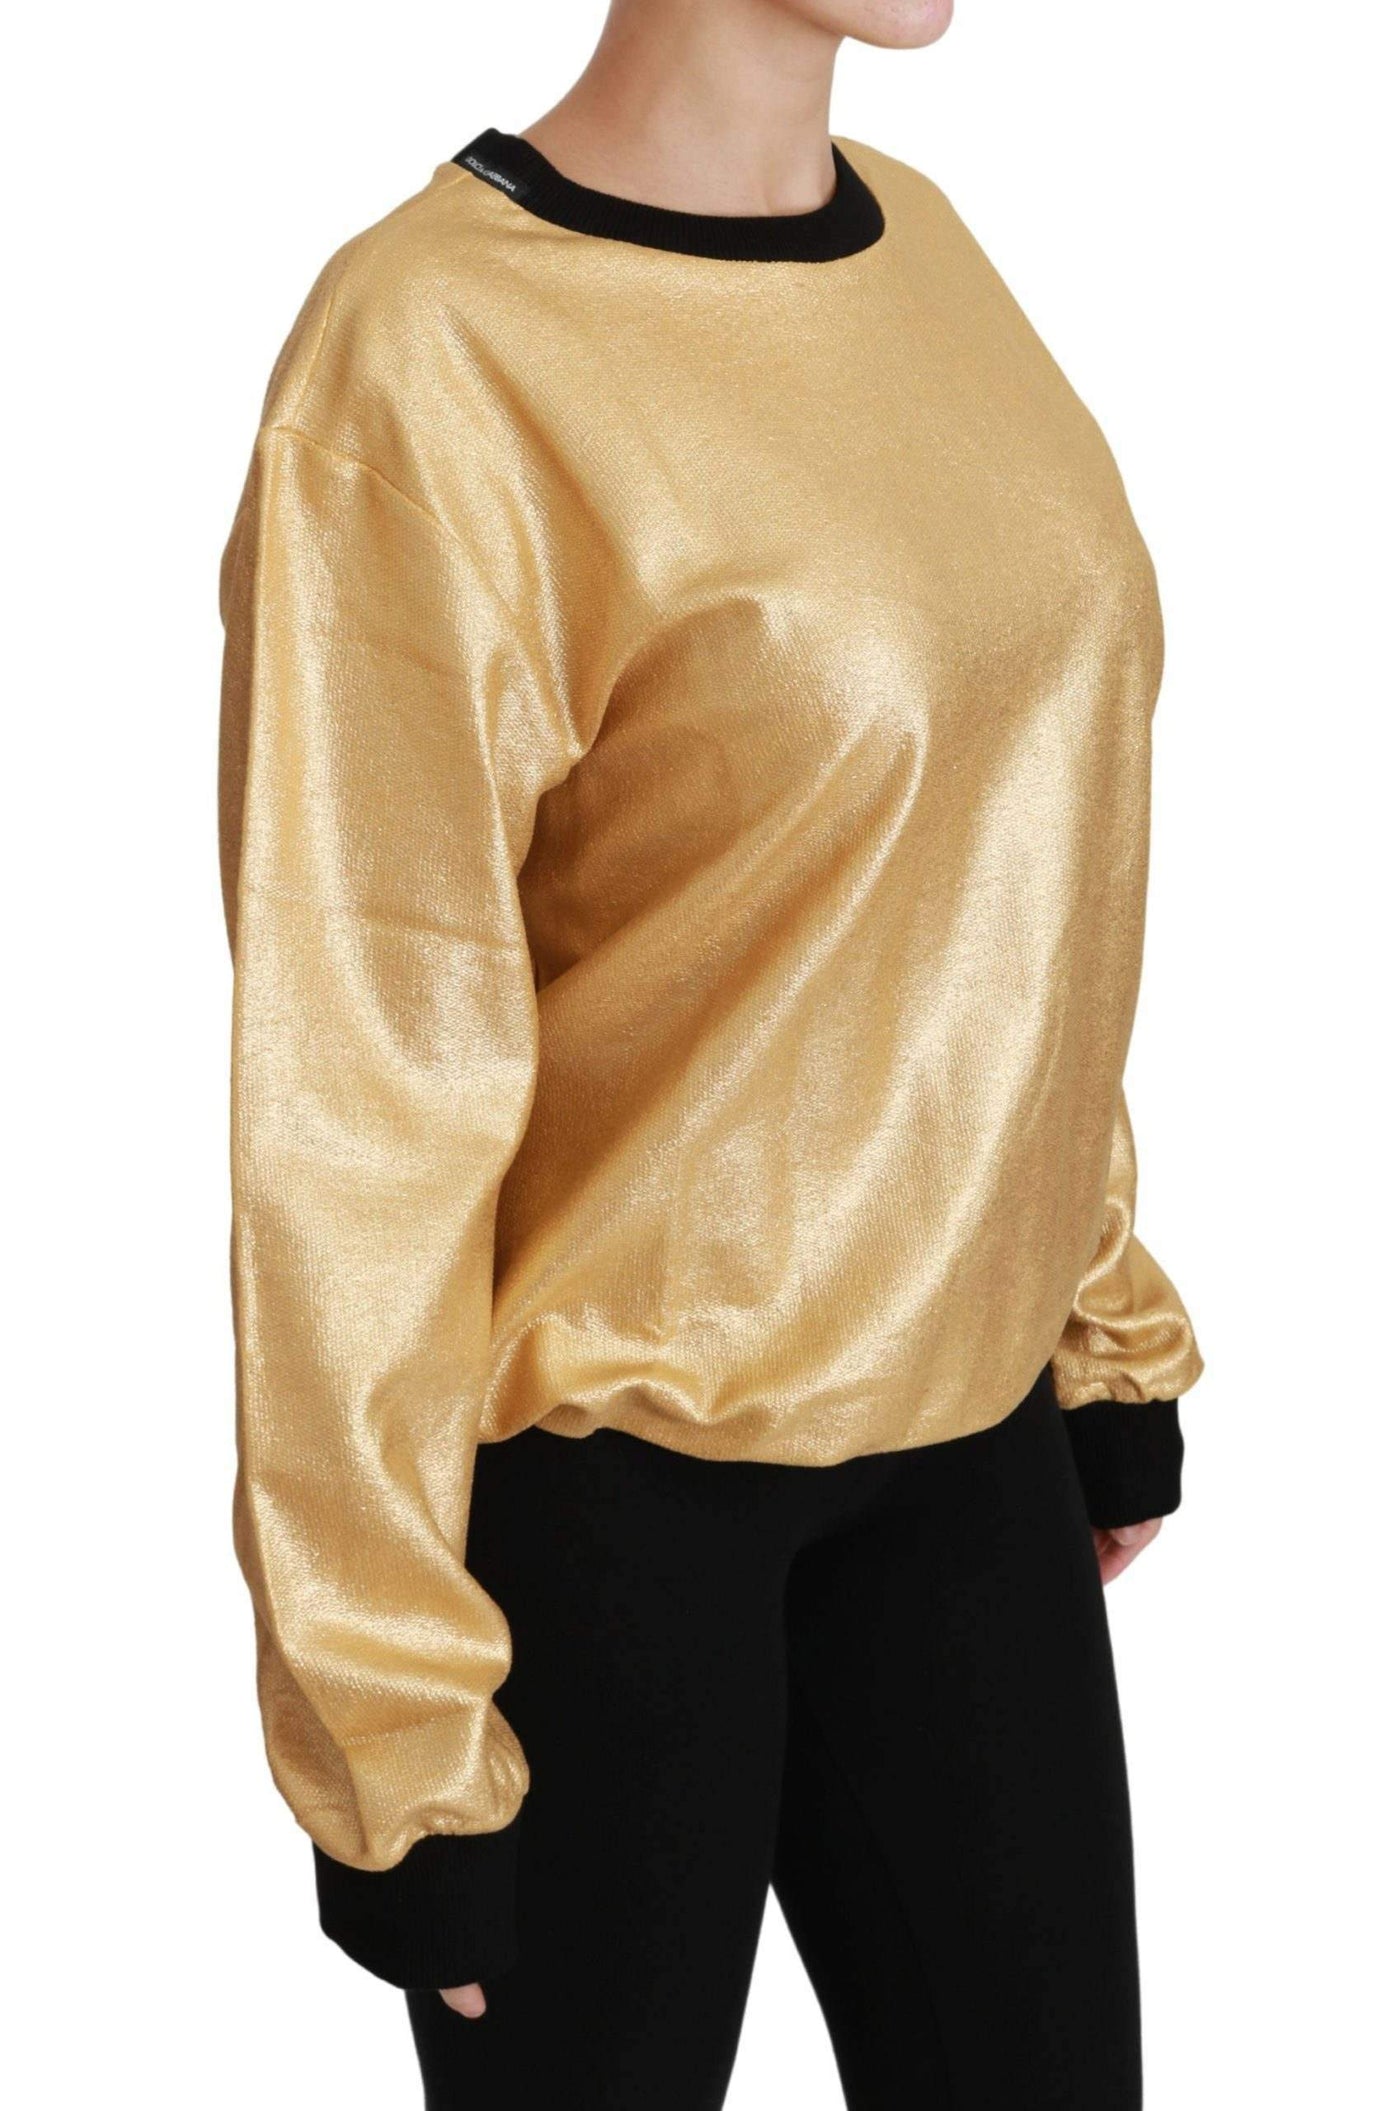 Dolce & Gabbana  Gold Cotton Crewneck Pullover Sweater #women, Brand_Dolce & Gabbana, Catch, Dolce & Gabbana, feed-agegroup-adult, feed-color-gold, feed-gender-female, feed-size-IT36 | XS, feed-size-IT38|XS, feed-size-IT40|S, feed-size-IT42|M, feed-size-IT44|L, feed-size-IT46|XL, Gender_Women, Gold, IT36 | XS, IT40|S, IT42|M, IT44|L, IT46|XL, Kogan, Sweaters - Women - Clothing, Women - New Arrivals at SEYMAYKA